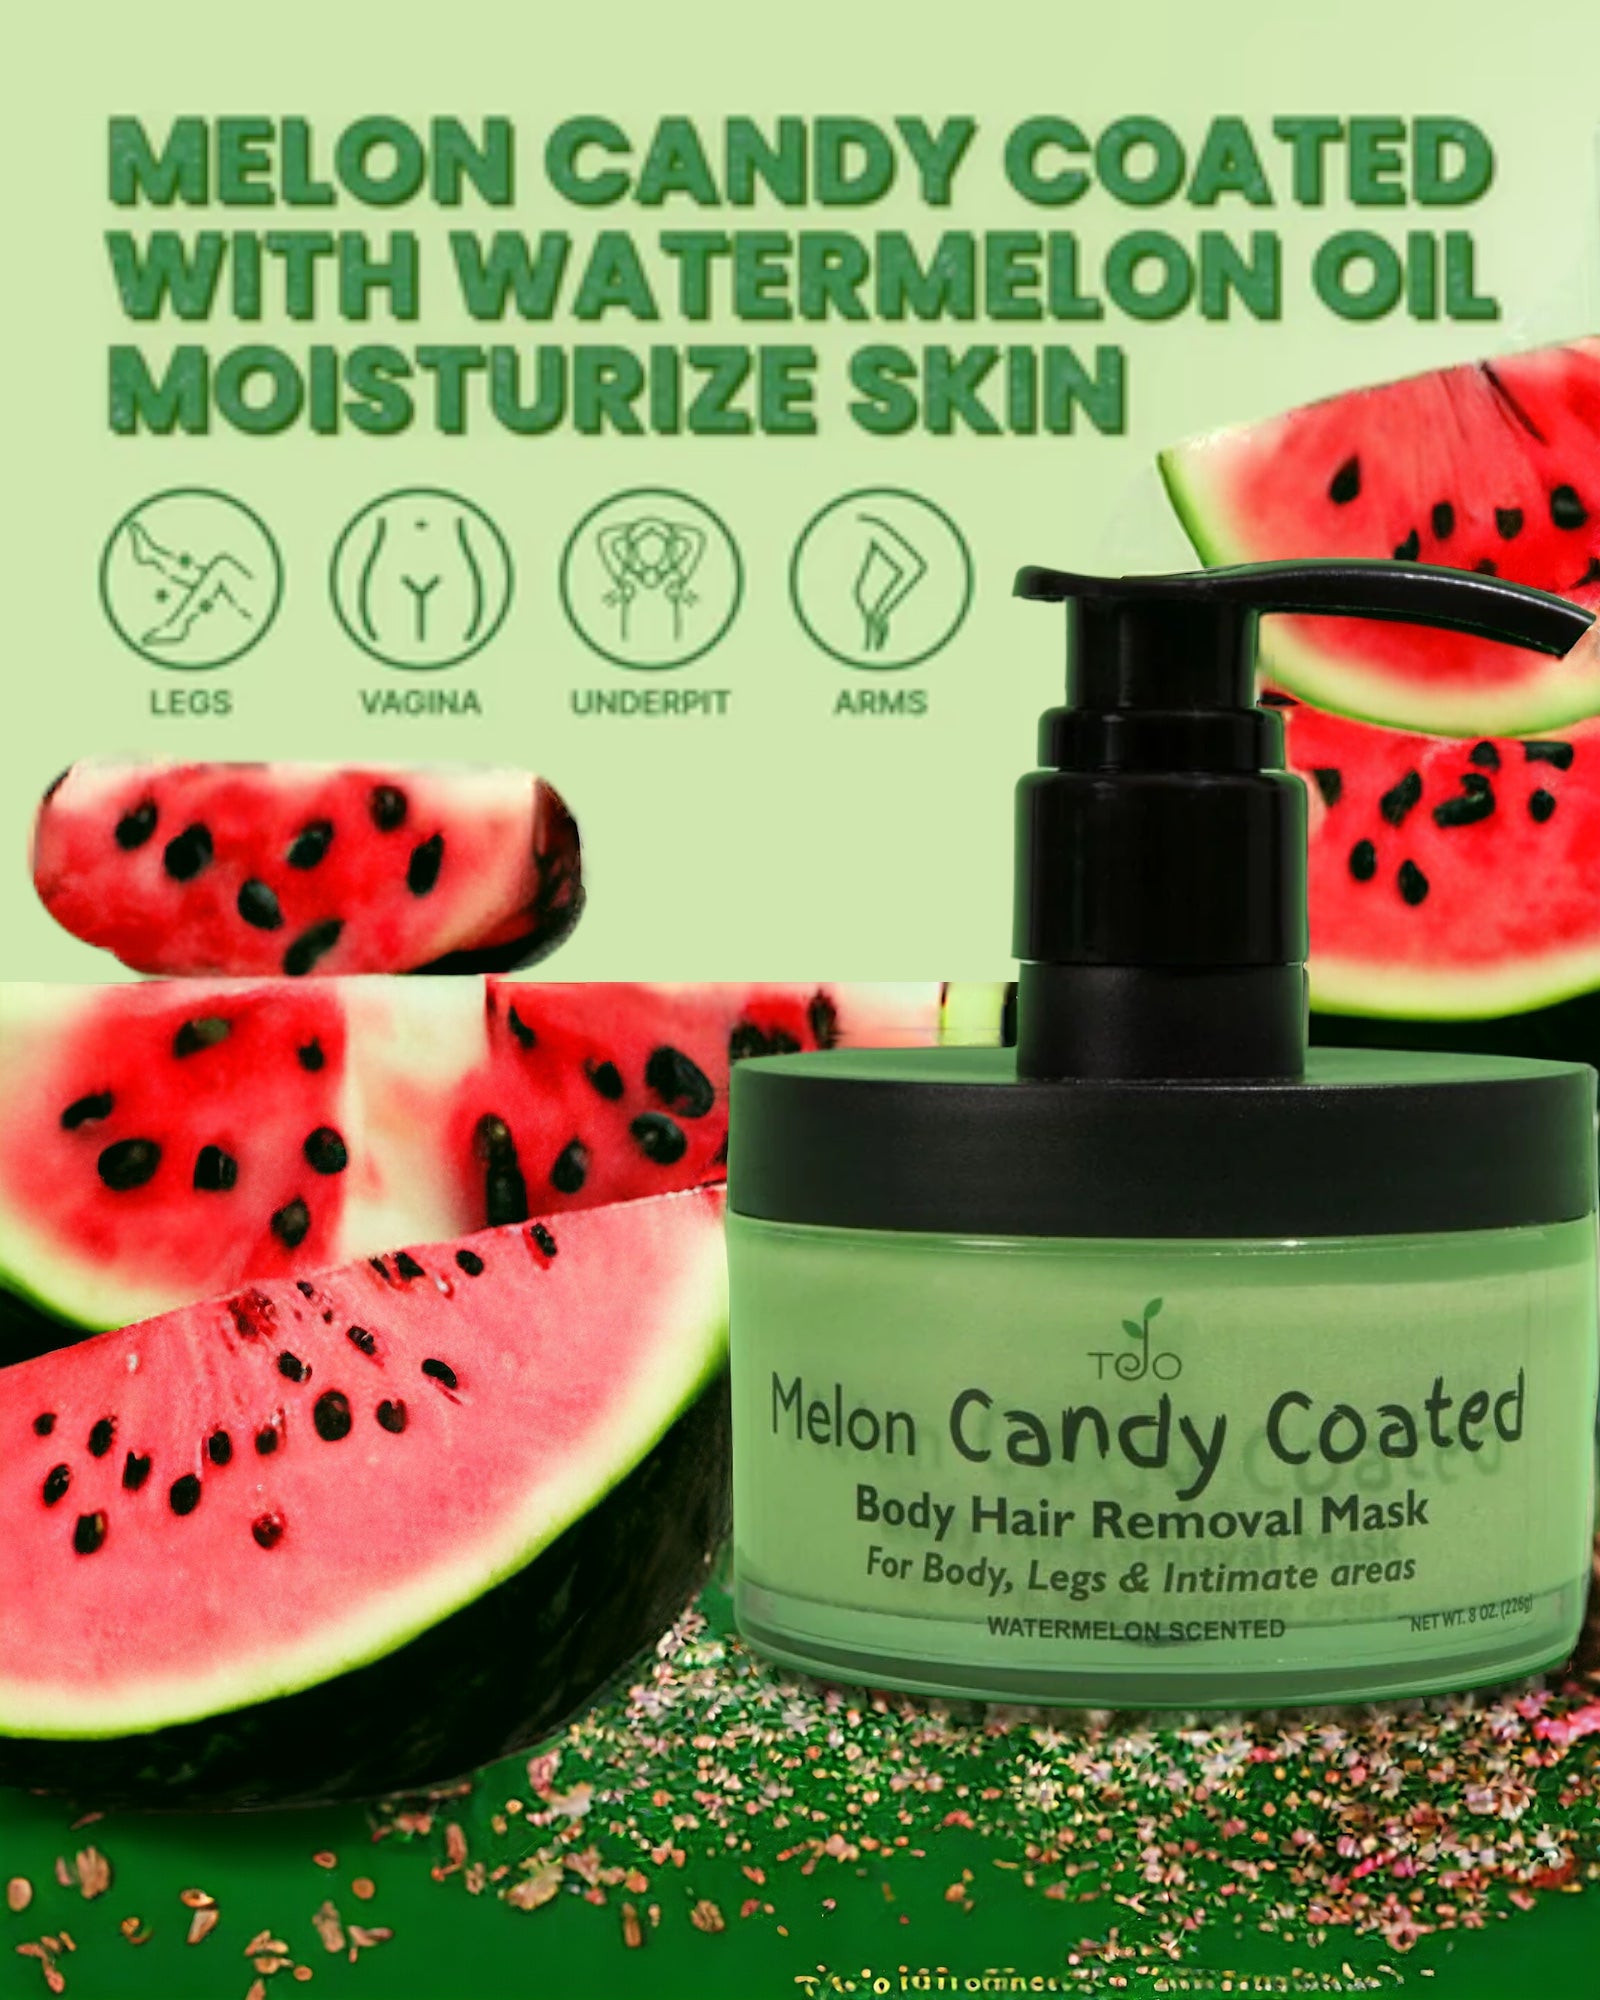 Melon Candy Coated